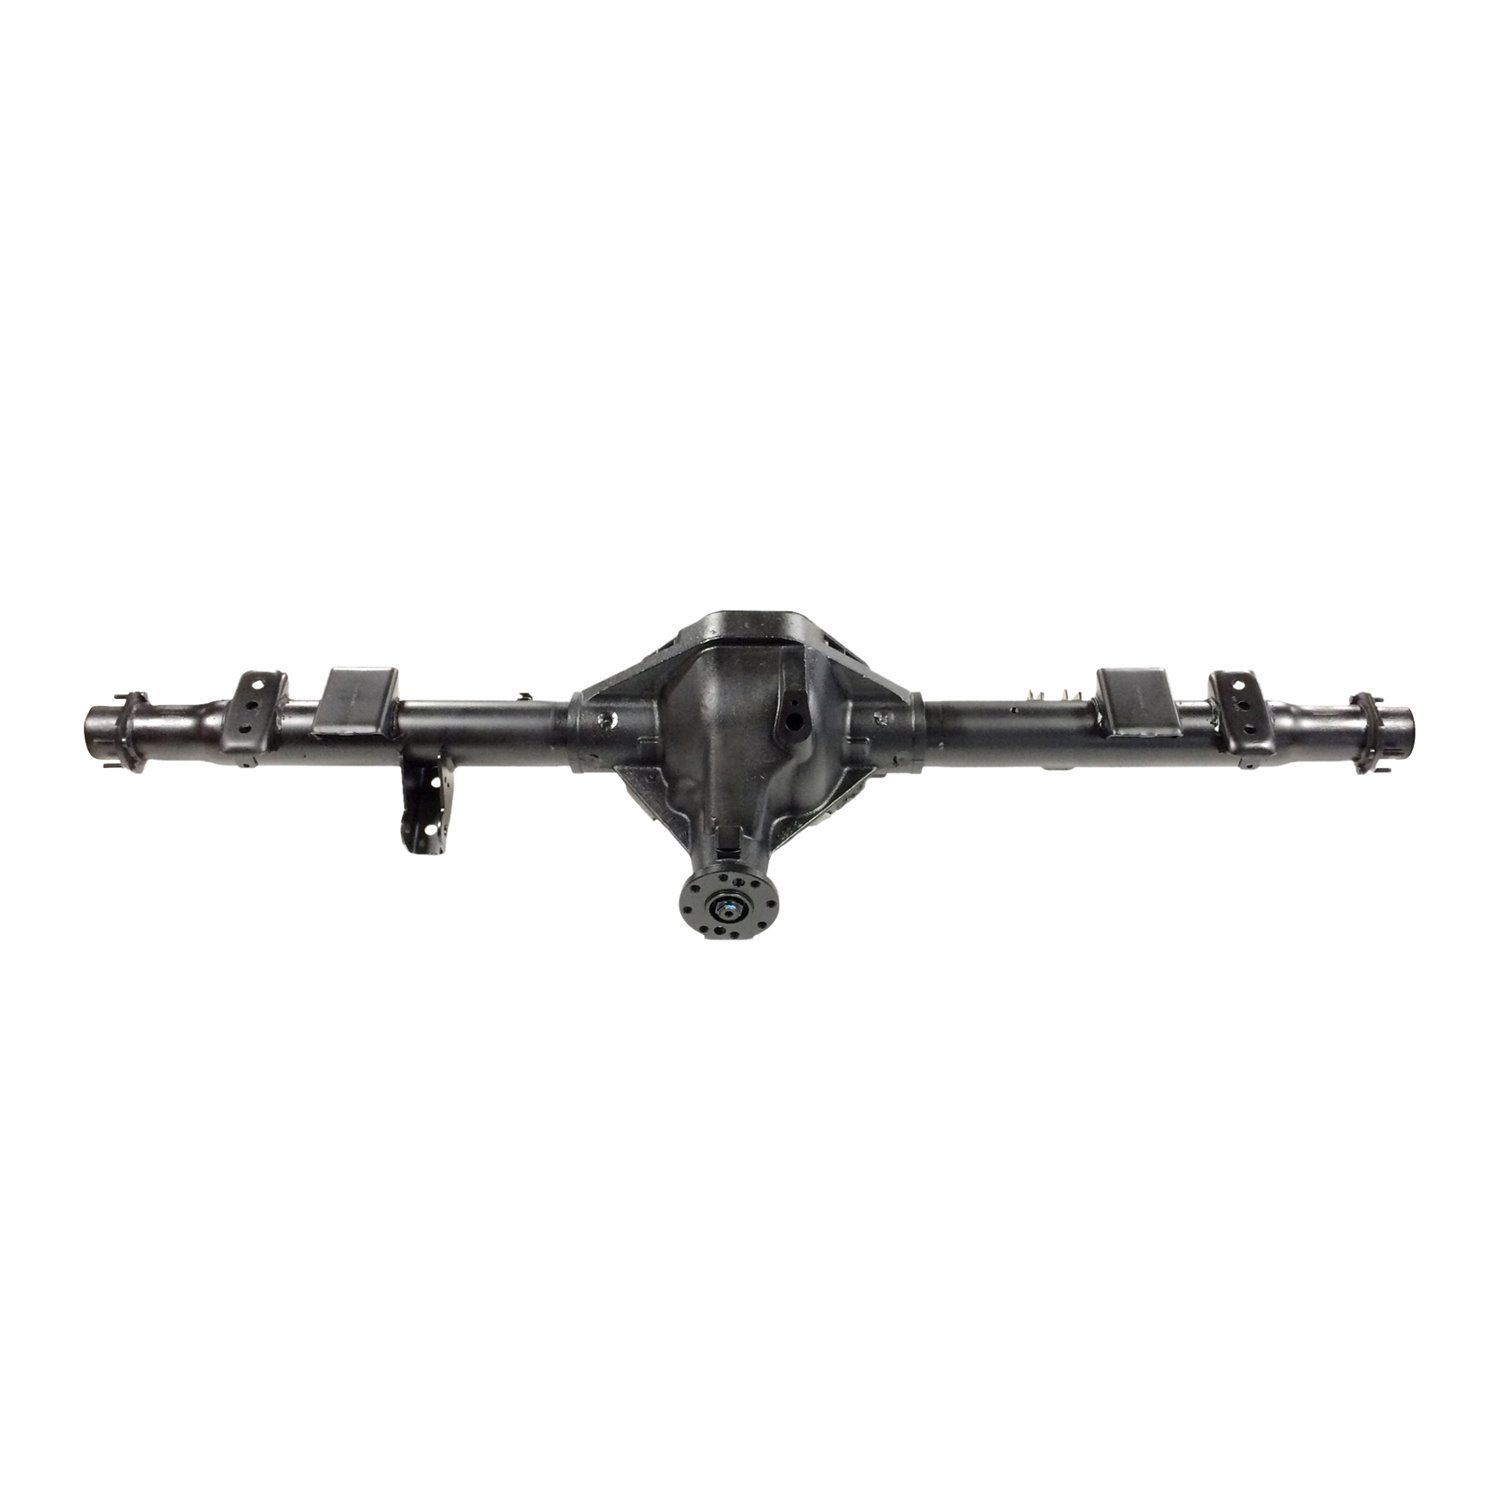 Remanufactured Complete Axle Assembly for Chrysler 9.25" 2005 Dodge D1500 3.21 Ratio, 2wd